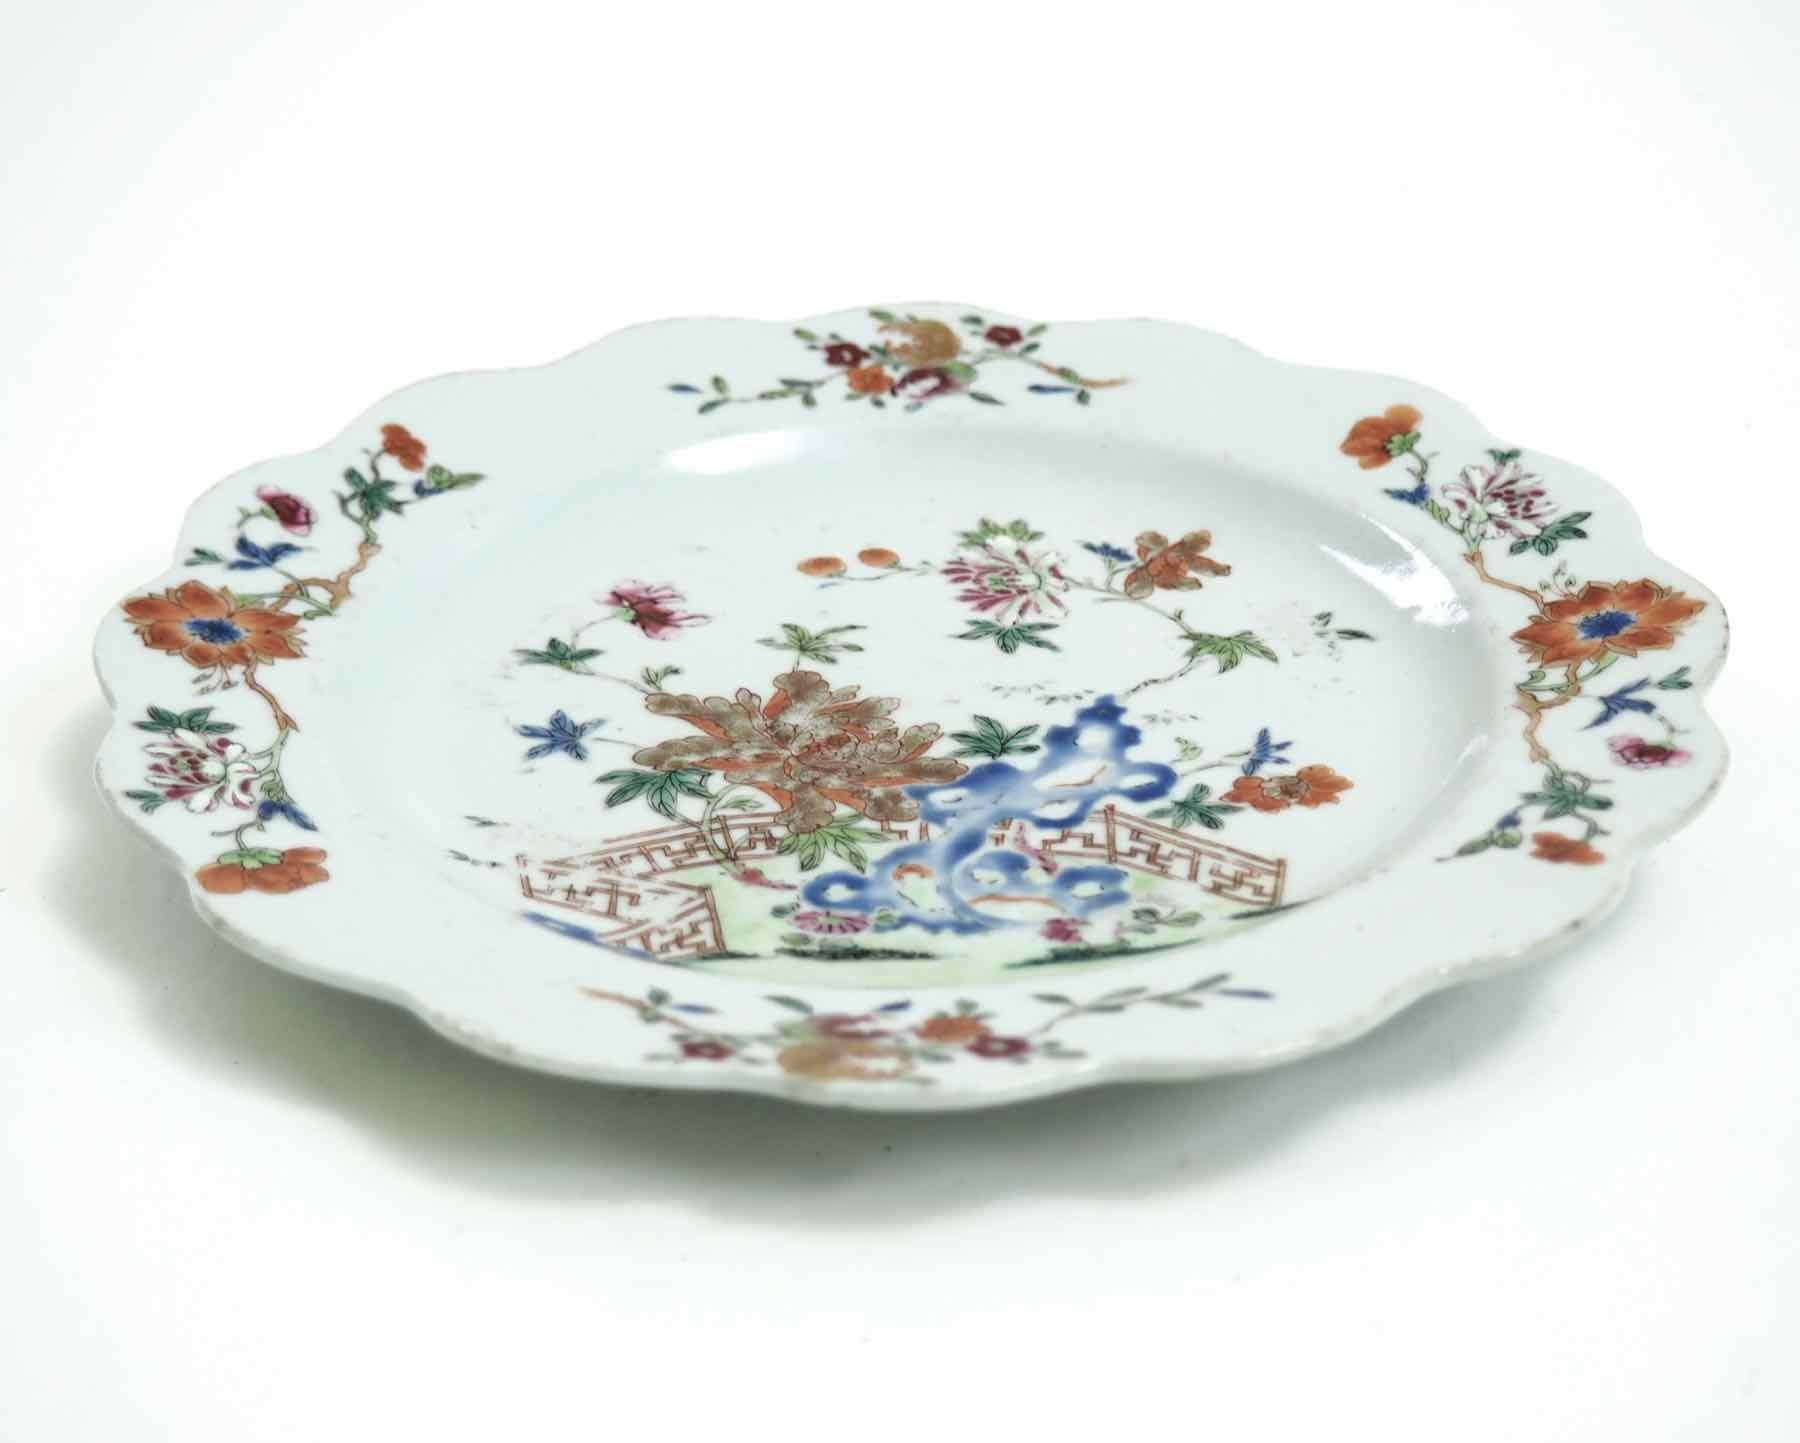 Chinese plate, 18th century
Measures: H. 2 Dia. 23 cm 
H. 0.7 Dia. 9 in.